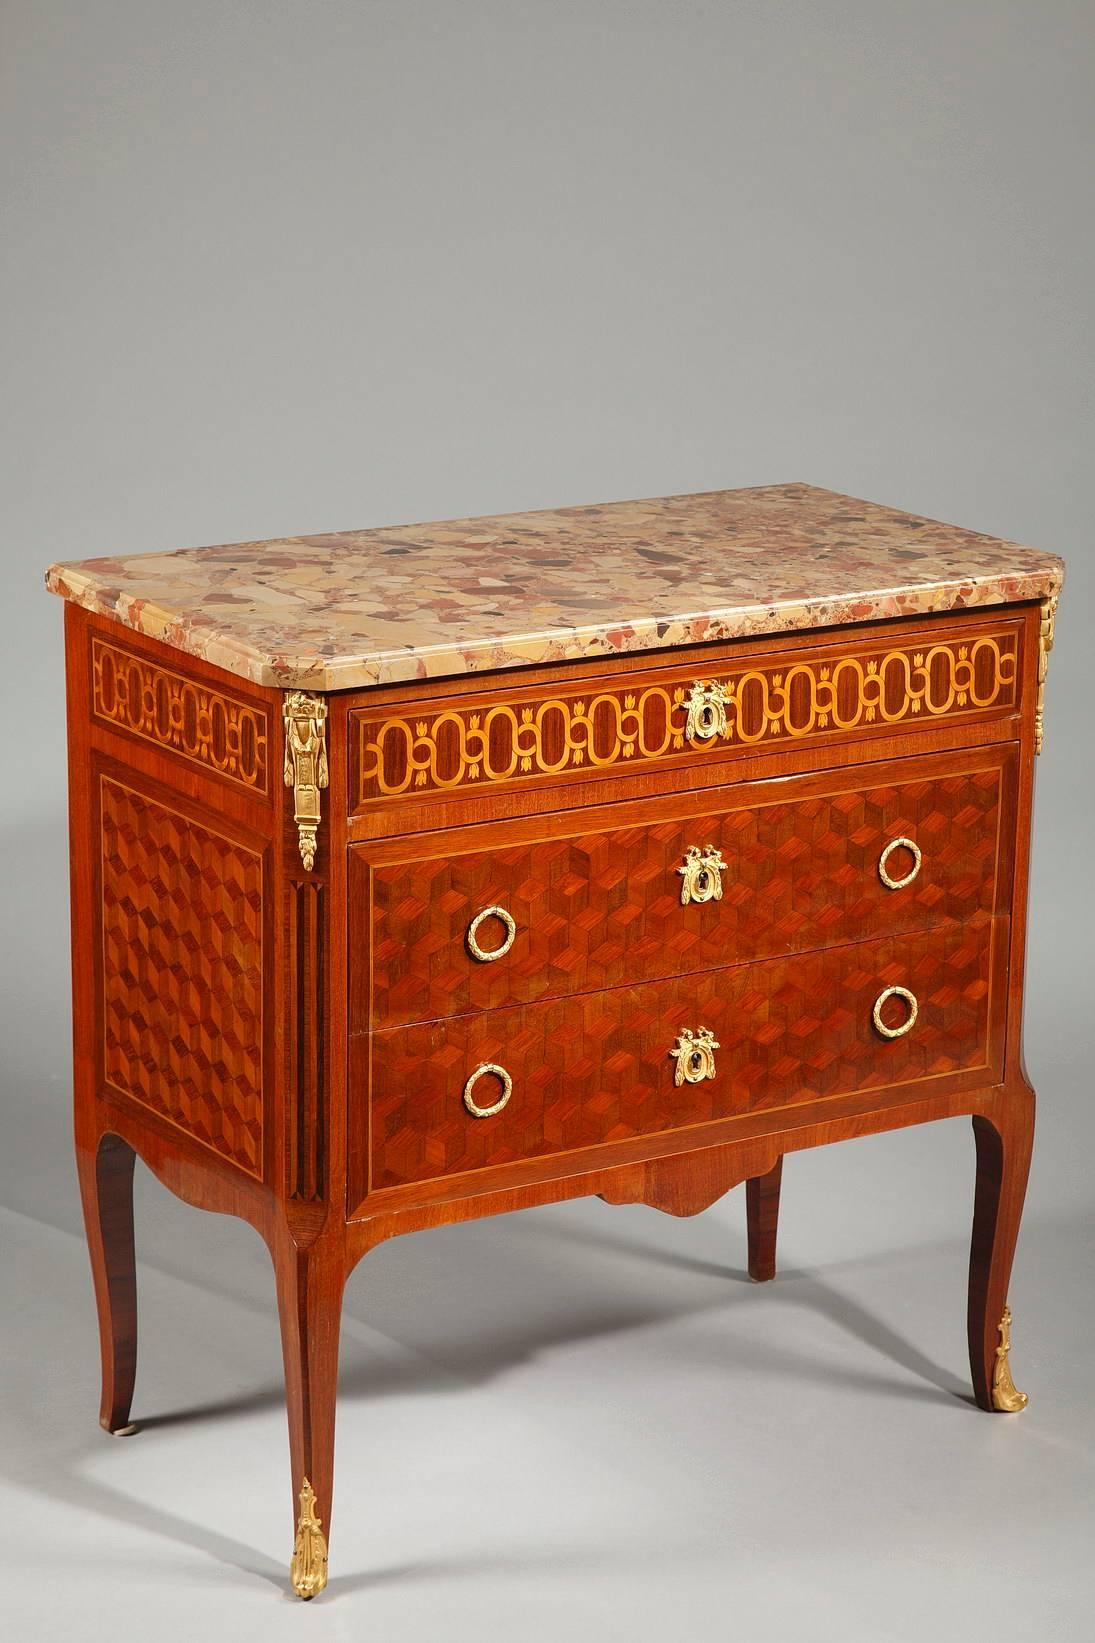 Louis XVI Transitional Style Ormolu-Mounted Marquetry Commode, 19th Century For Sale